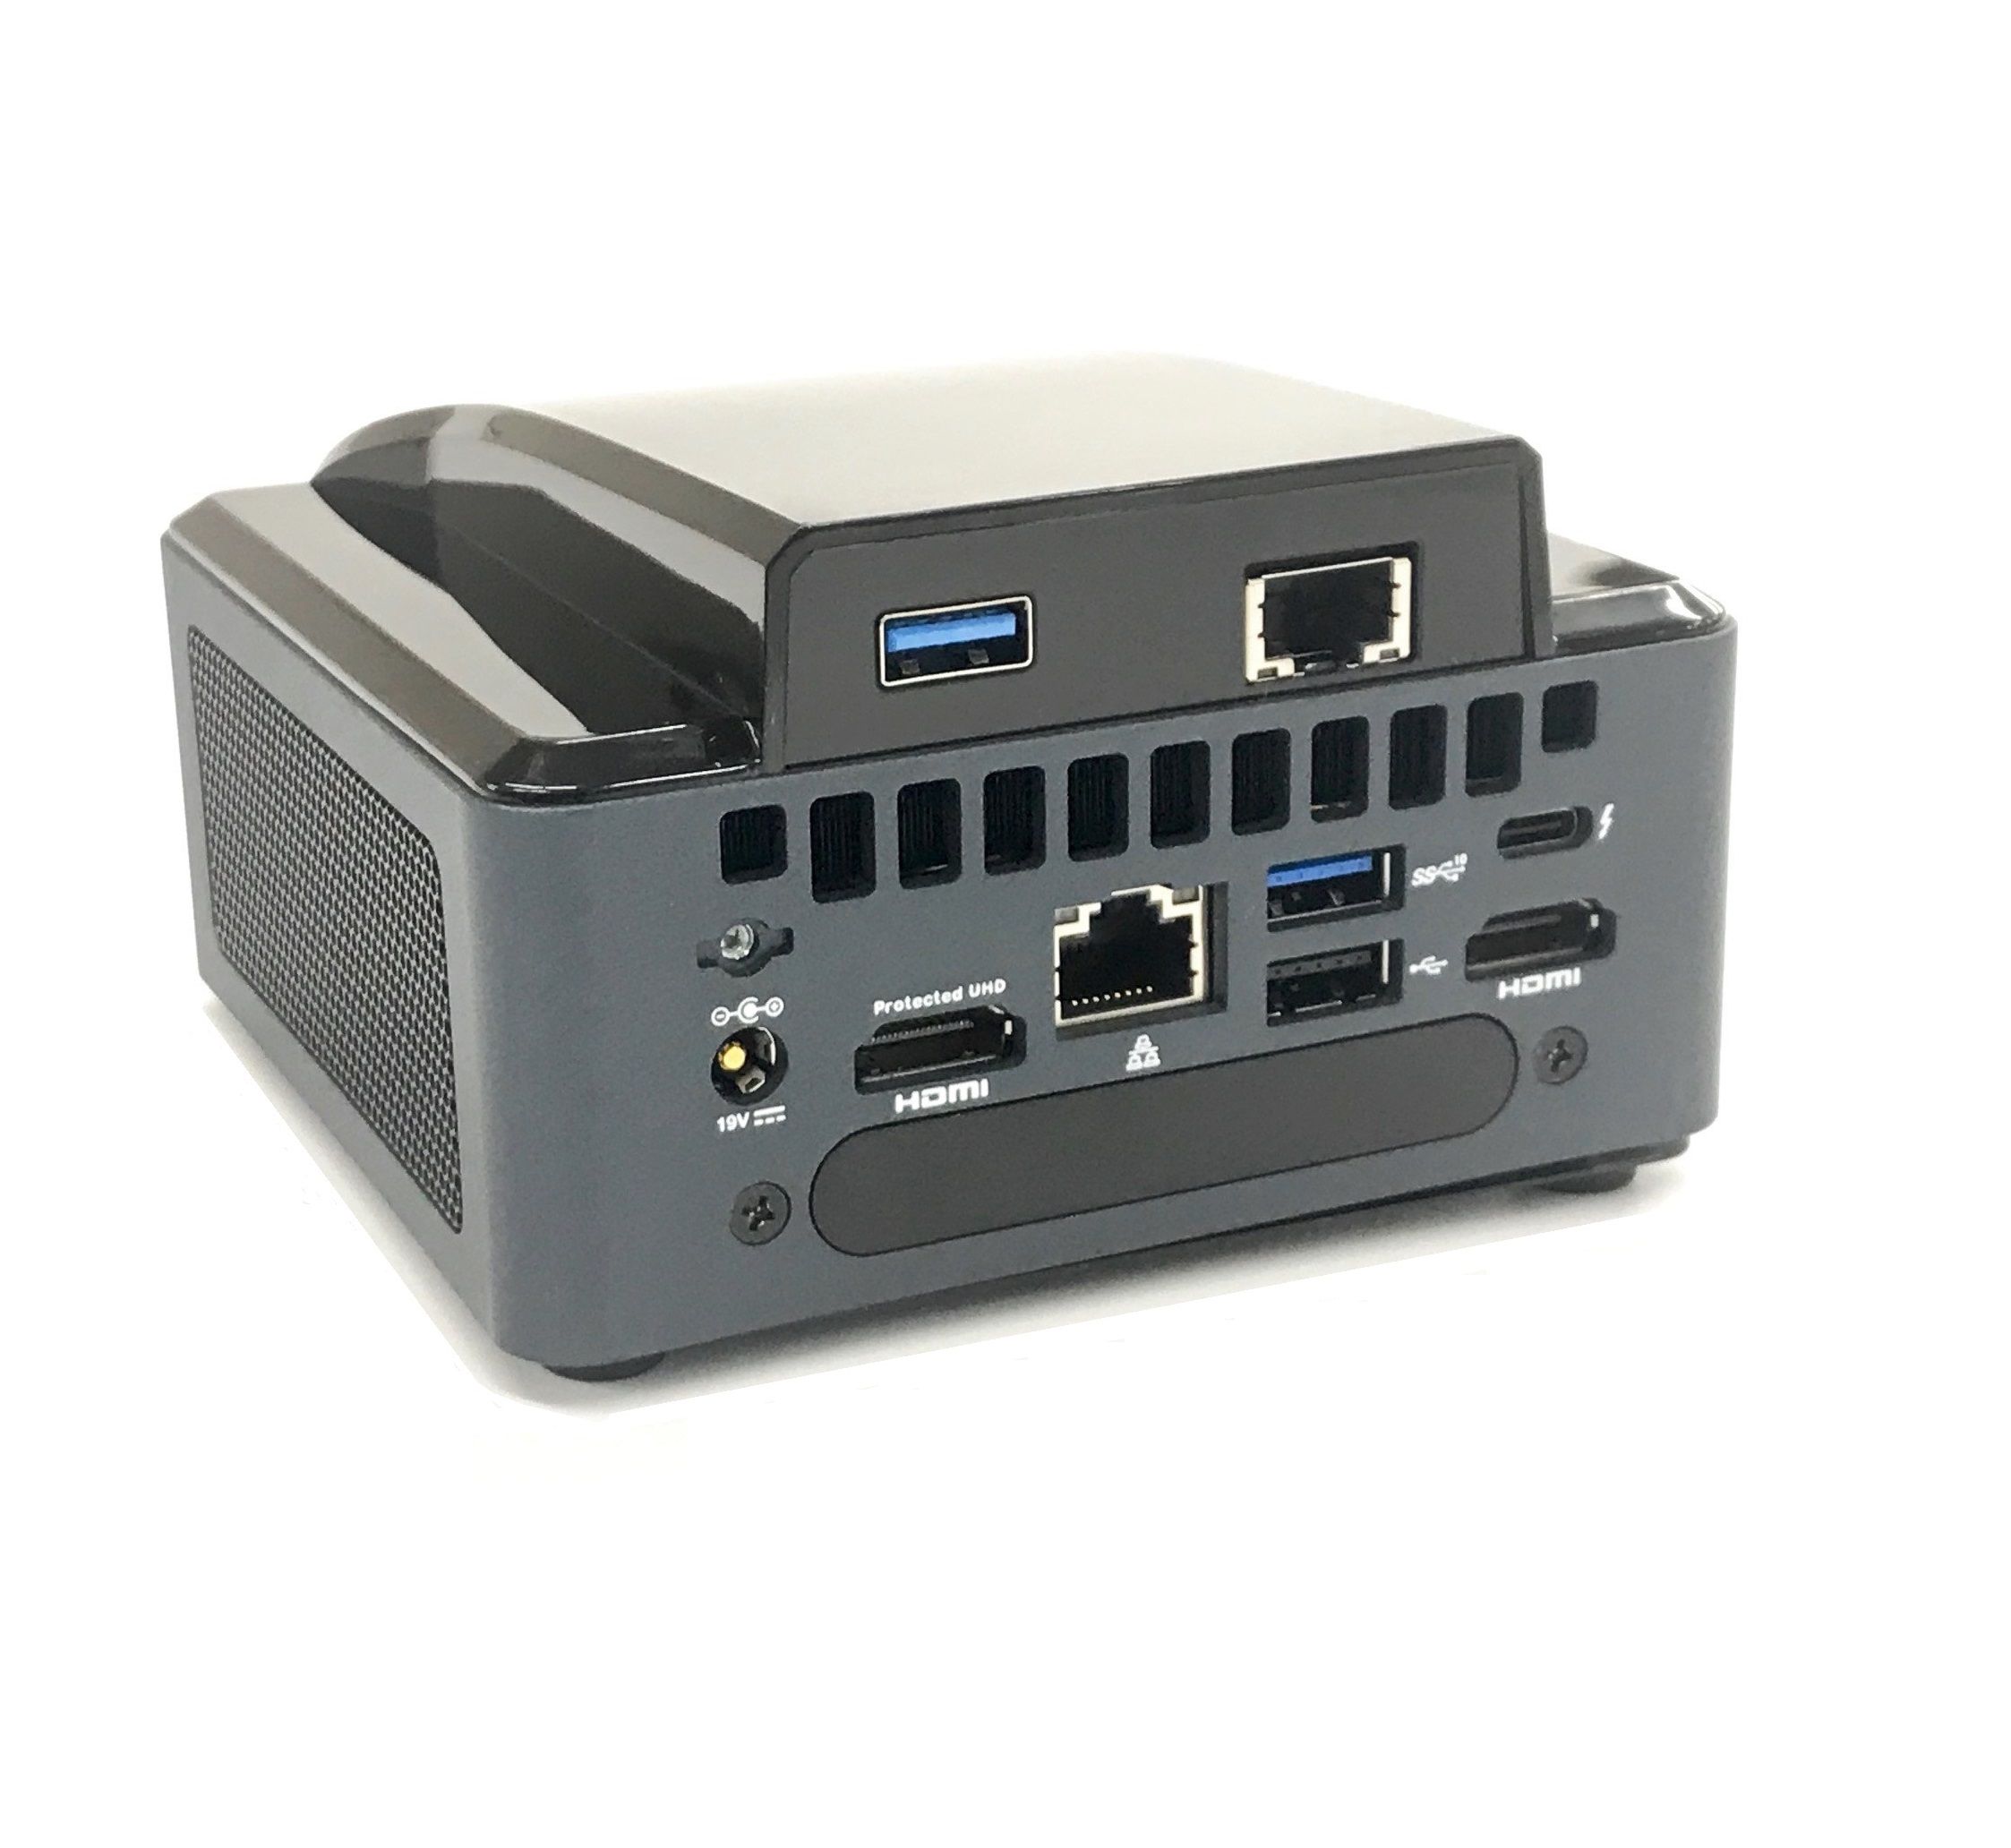 Intel NUC GIGABIT RJ45 Ethernet with USB 3.0 Port for Provo and Panther Canyon